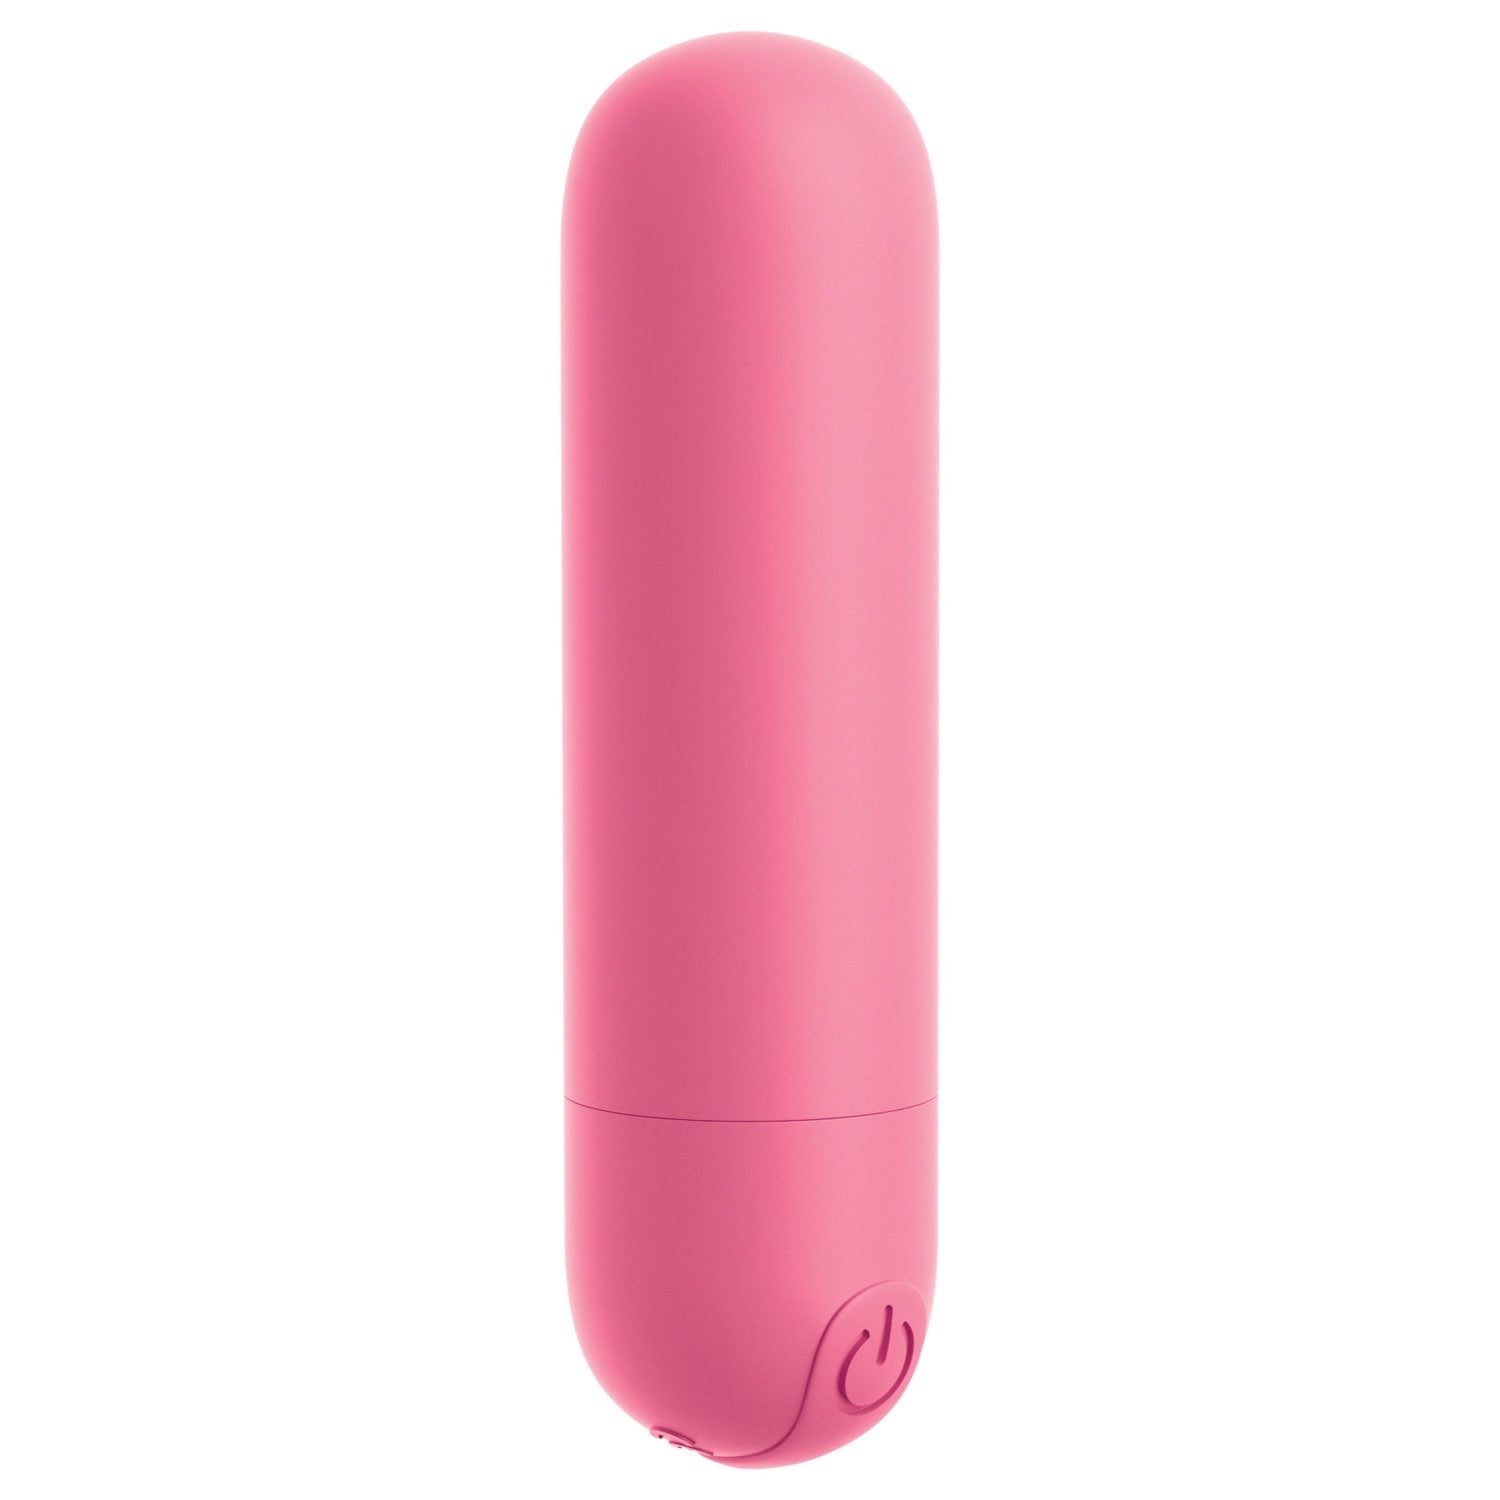 Omg Omg Bullets Play Pink Usb Rechargeable Bullet Fuchsia By